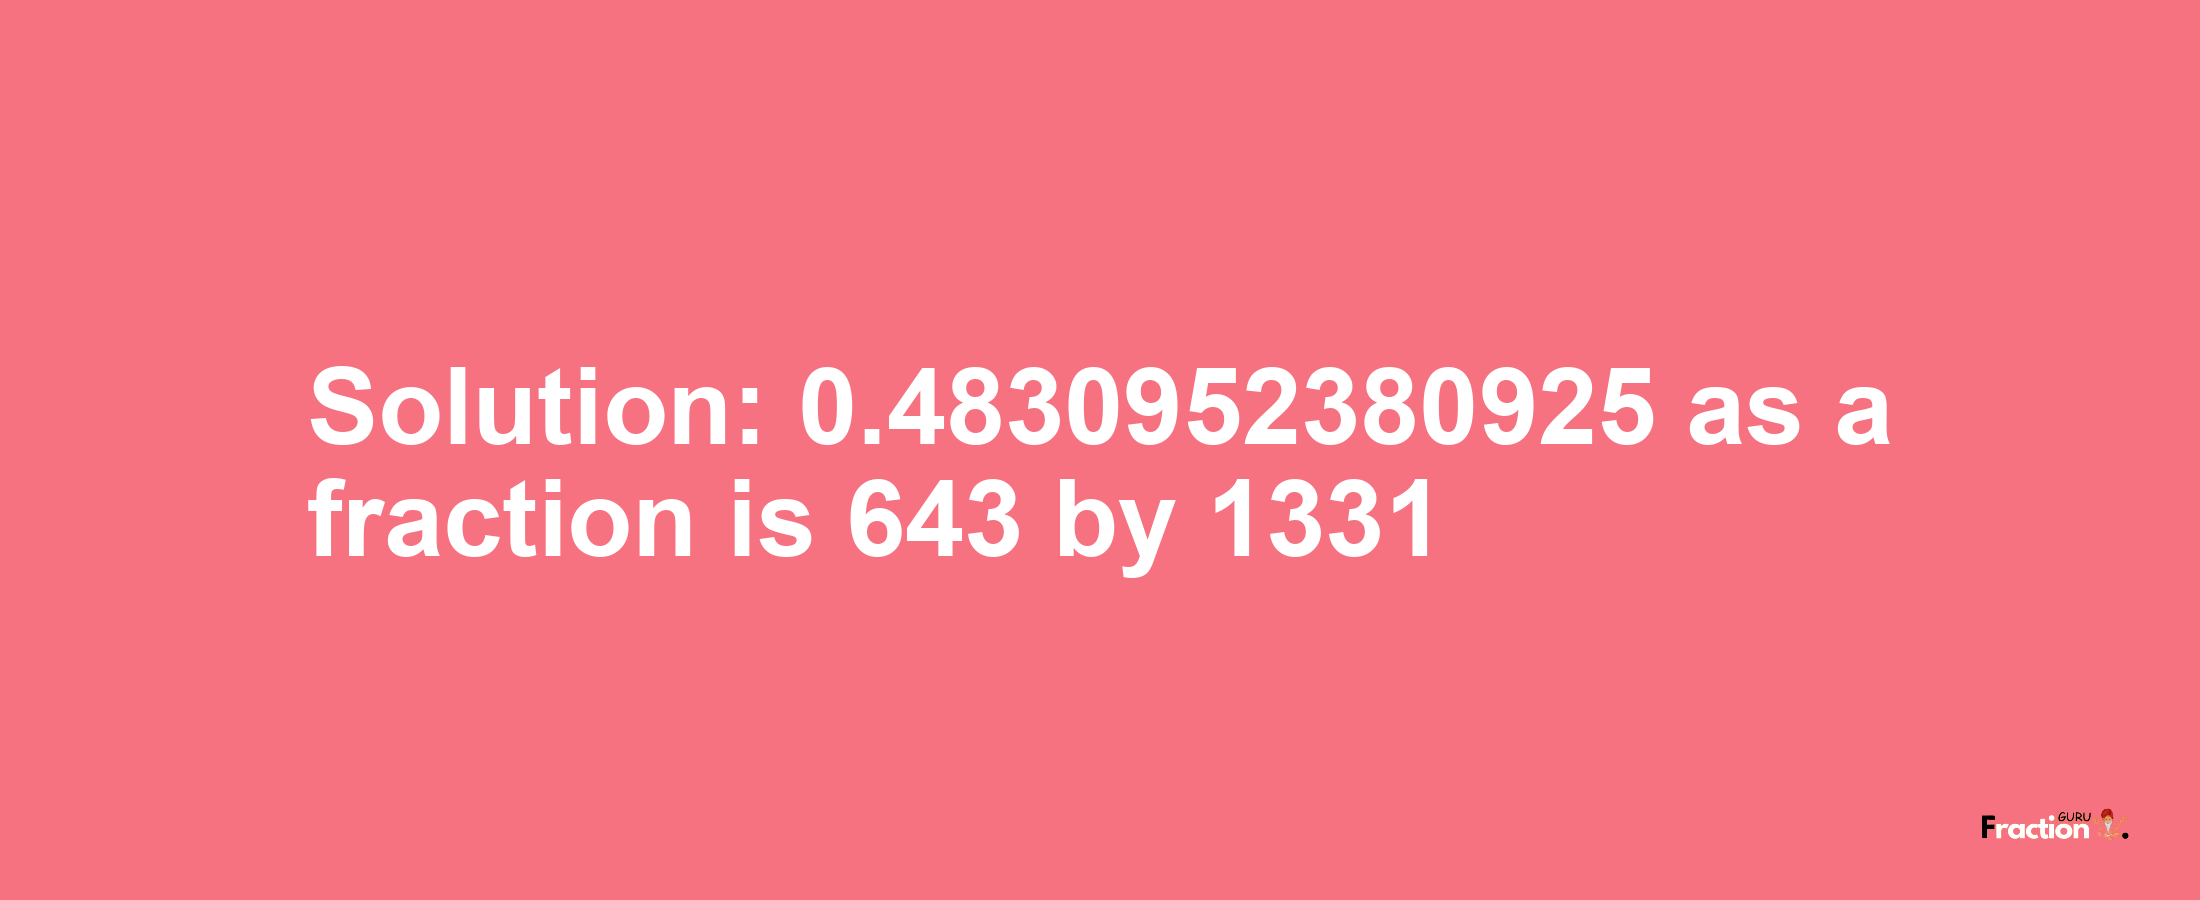 Solution:0.4830952380925 as a fraction is 643/1331